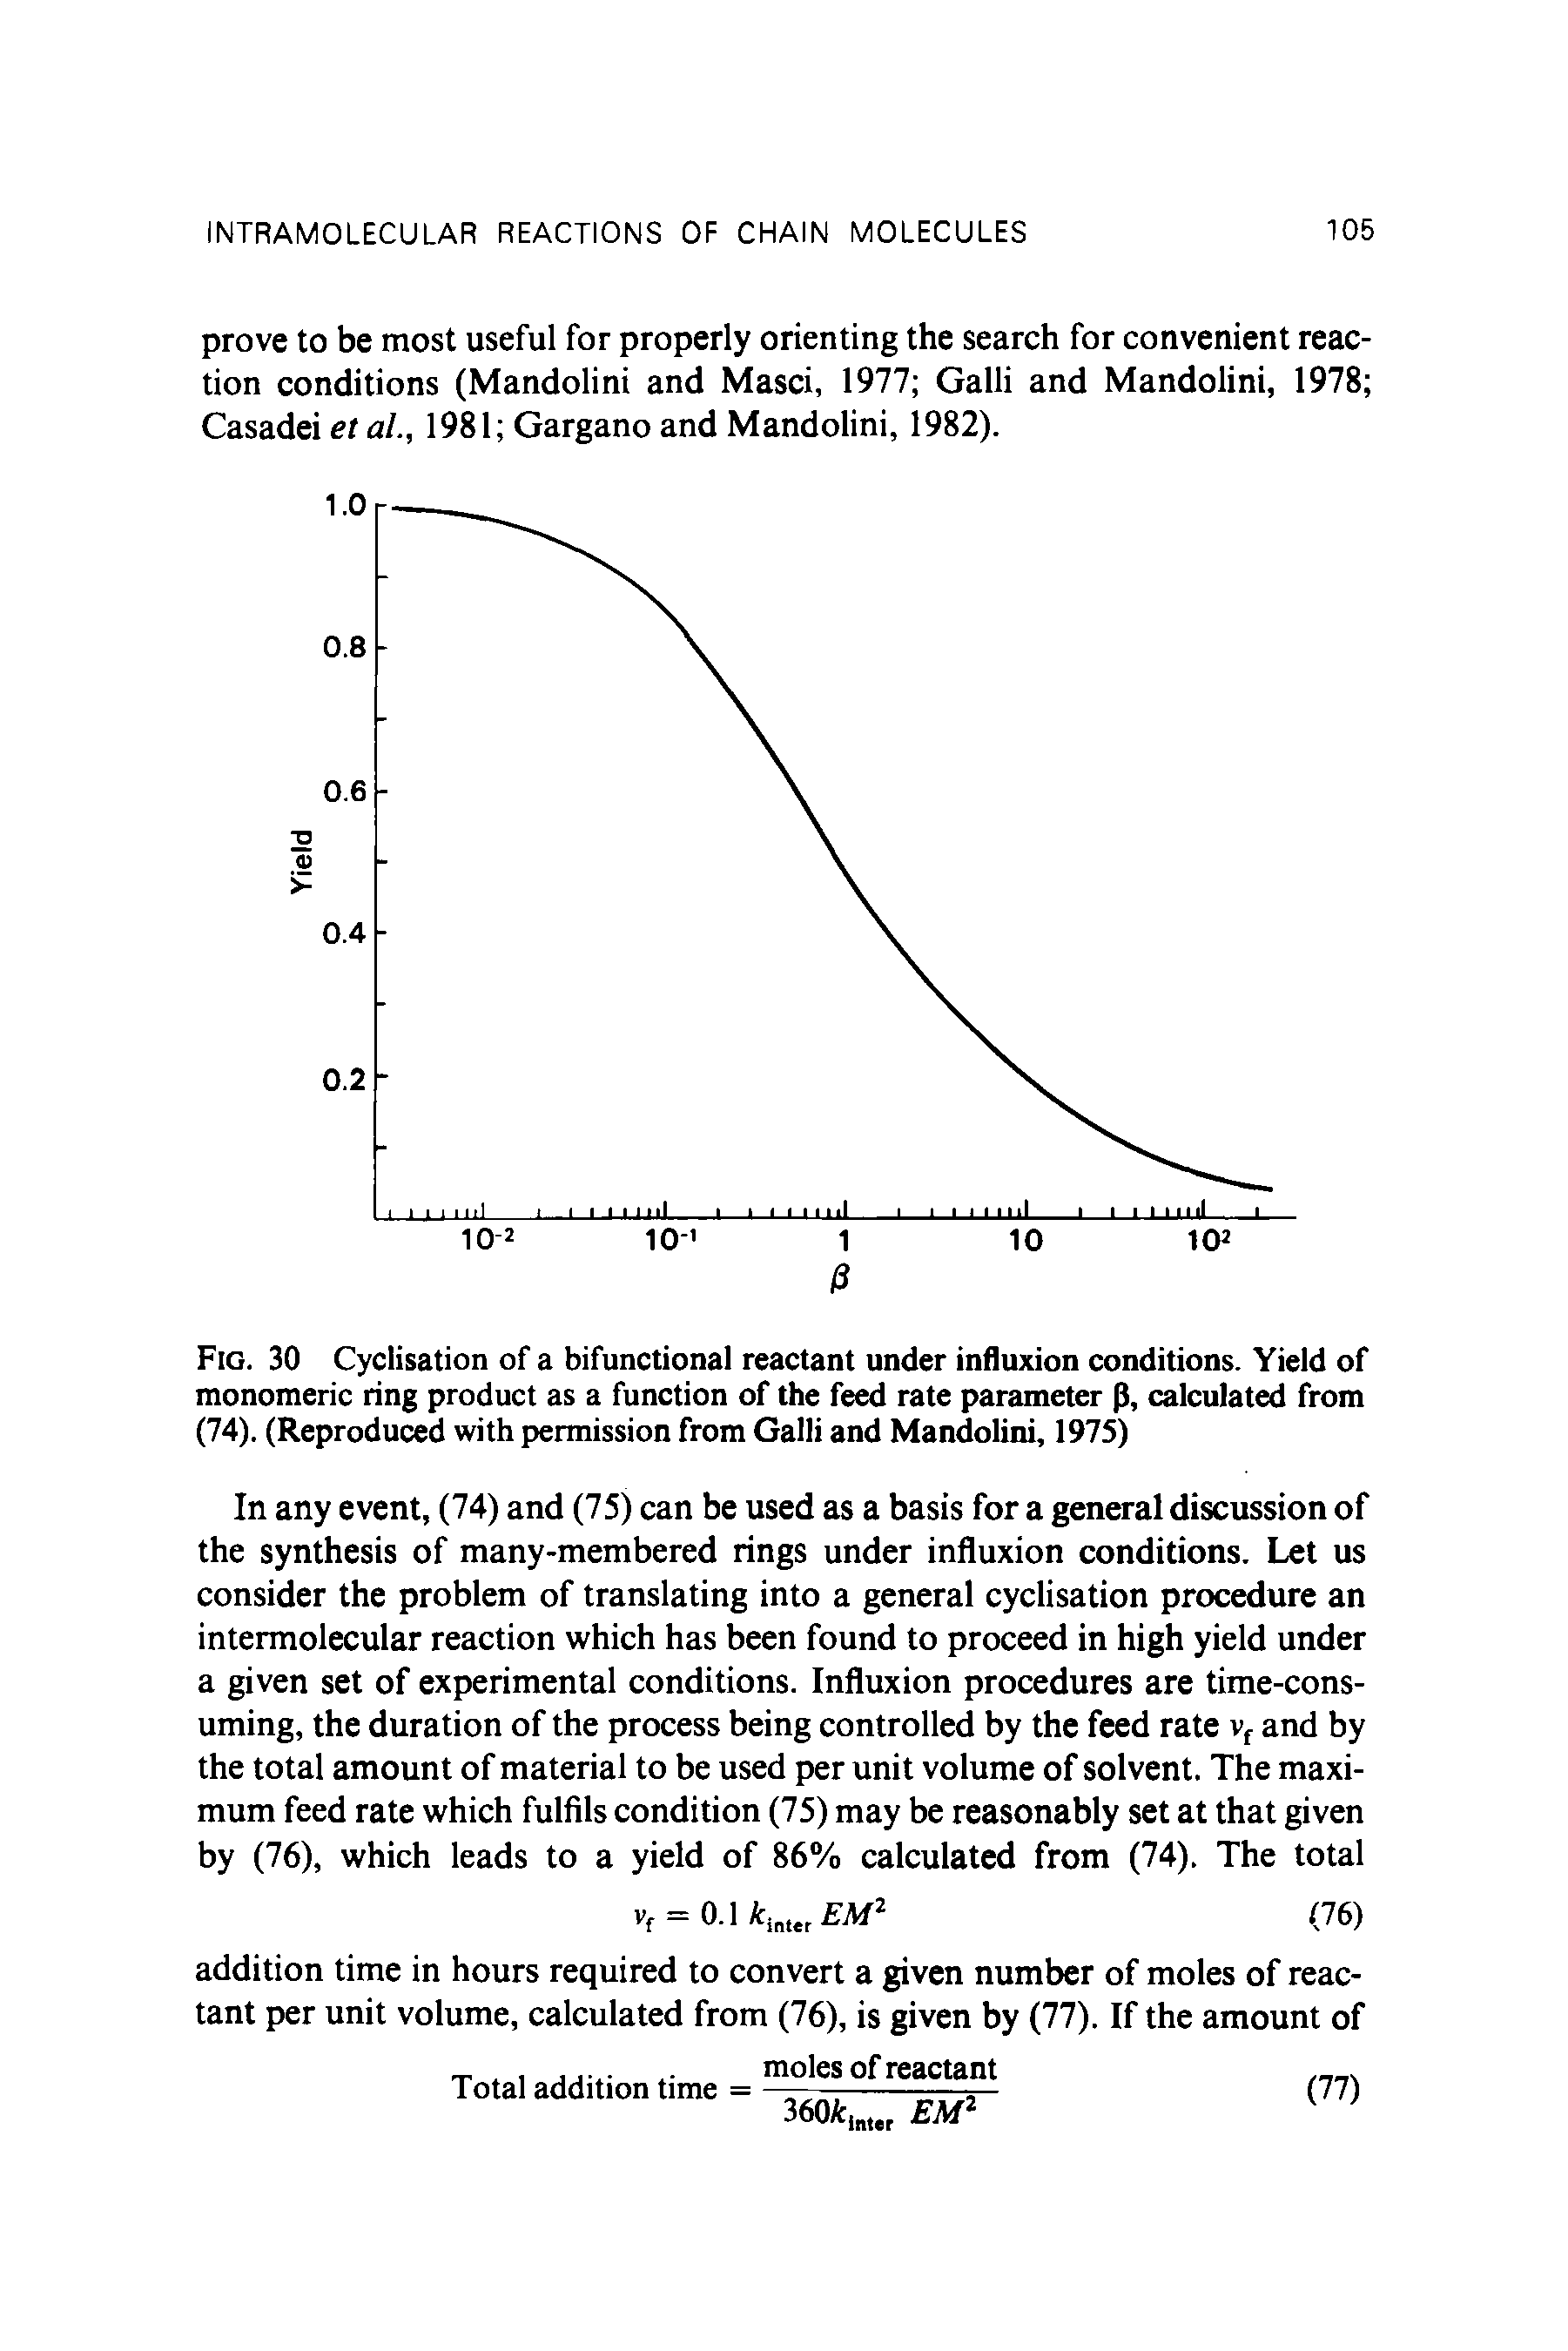 Fig. 30 Cyclisation of a bifunctional reactant under influxion conditions. Yield of monomeric ring product as a function of the feed rate parameter p, calculated from (74). (Reproduced with permission from Galli and Mandolini, 1975)...